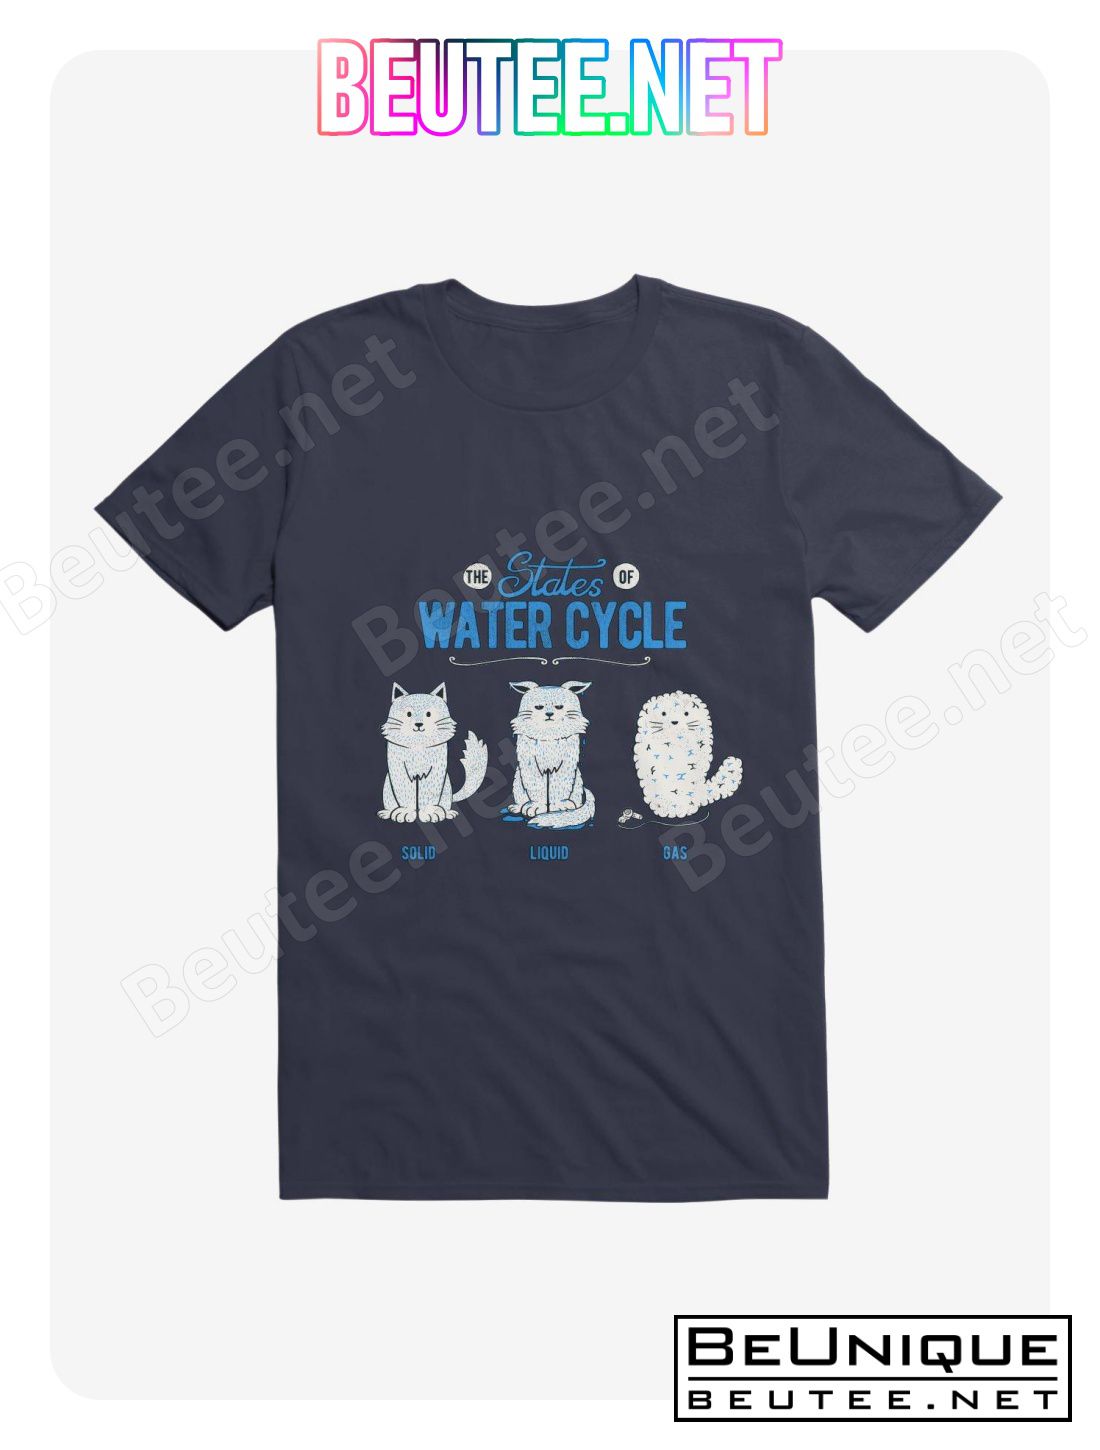 The States Of The Water Cycle Cat T-Shirt